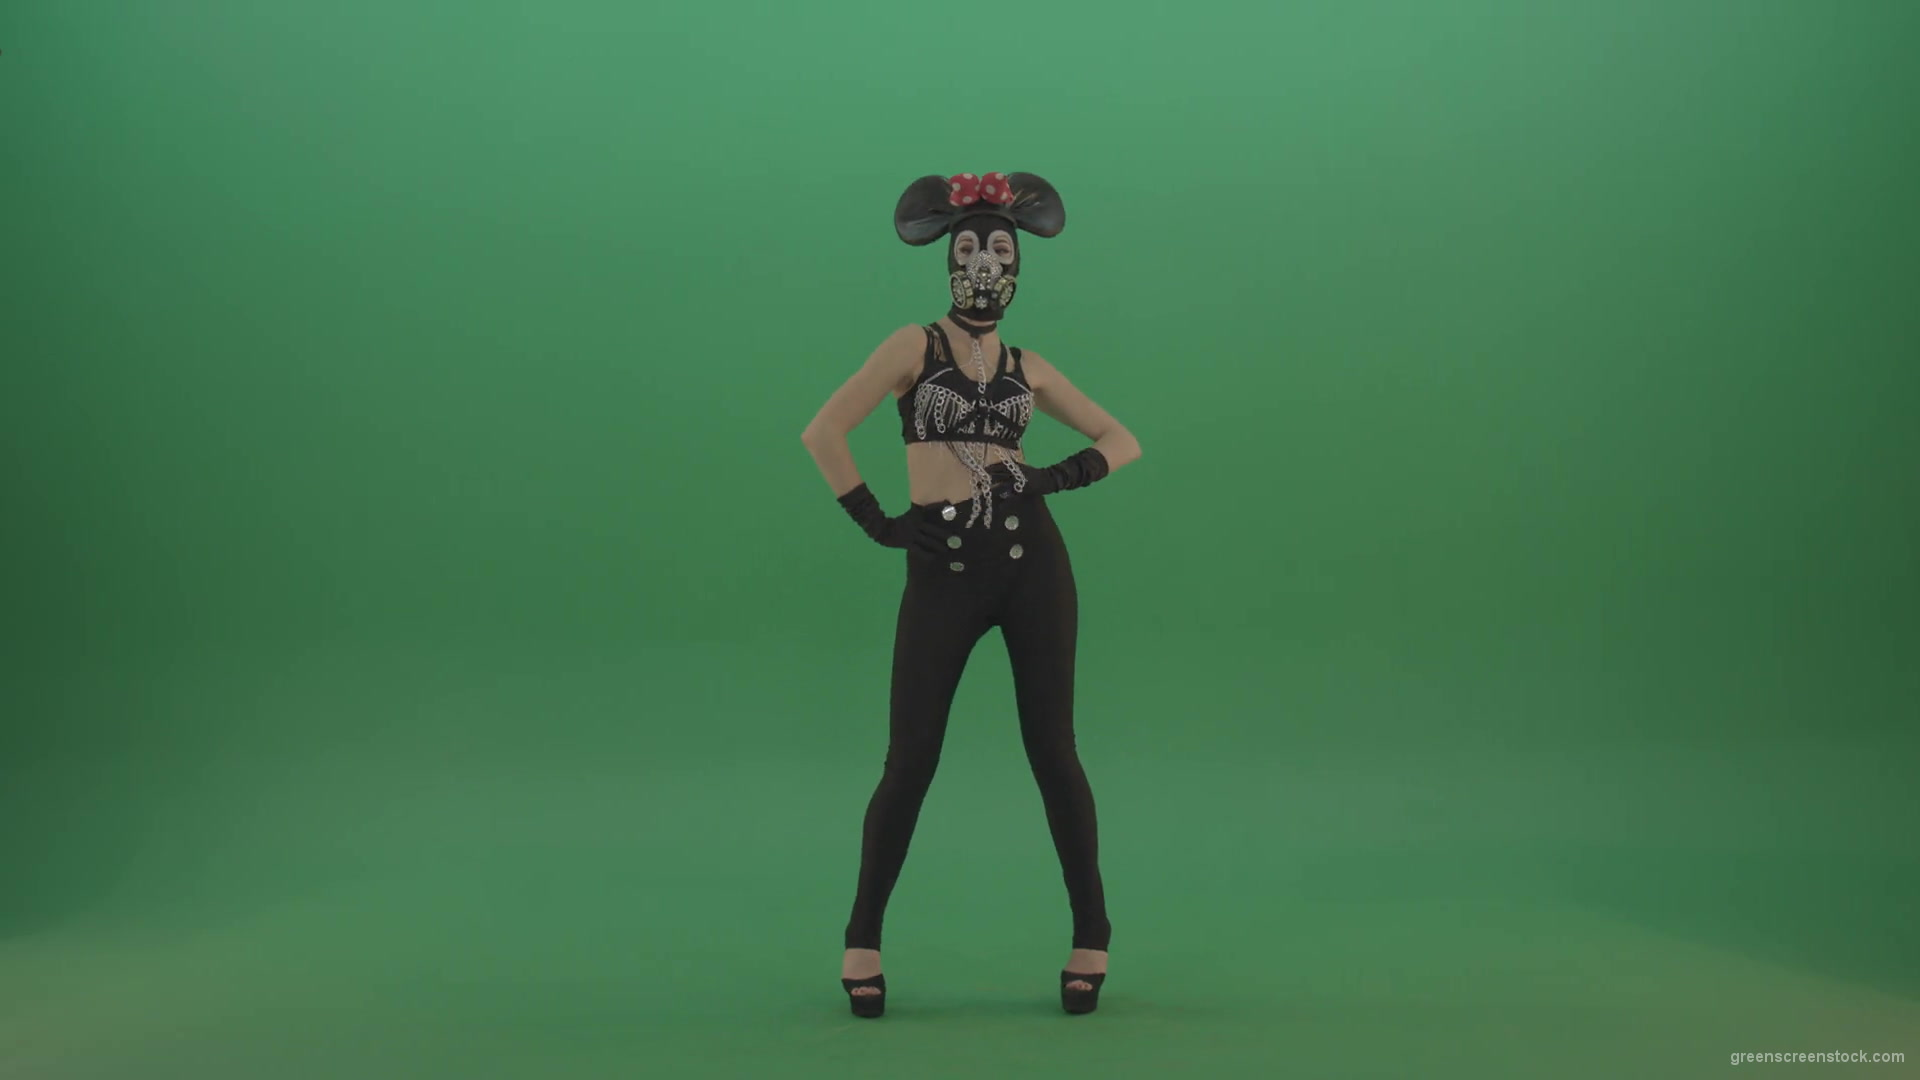 Full-size-strip-girl-in-mouse-costume-and-mask-shaking-ass-and-dancing-on-green-screen-1920_007 Green Screen Stock